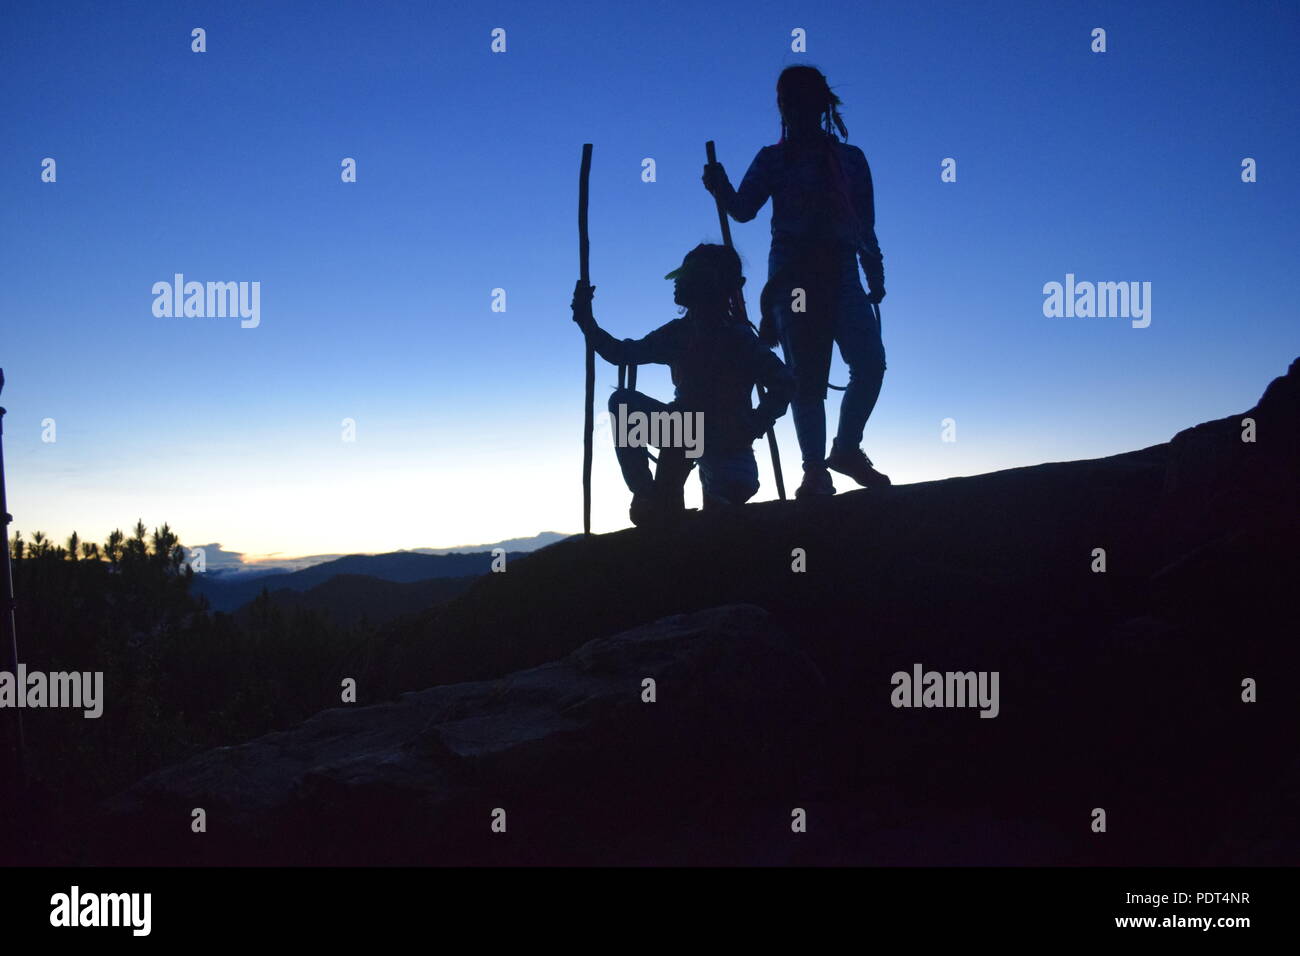 Silhouette Timeline of 2 young girls at the morning dusk standing on top of the Ampucao Sta. Fe ridges awaiting the Sunrise at Mount Ulap in Itogon, Stock Photo